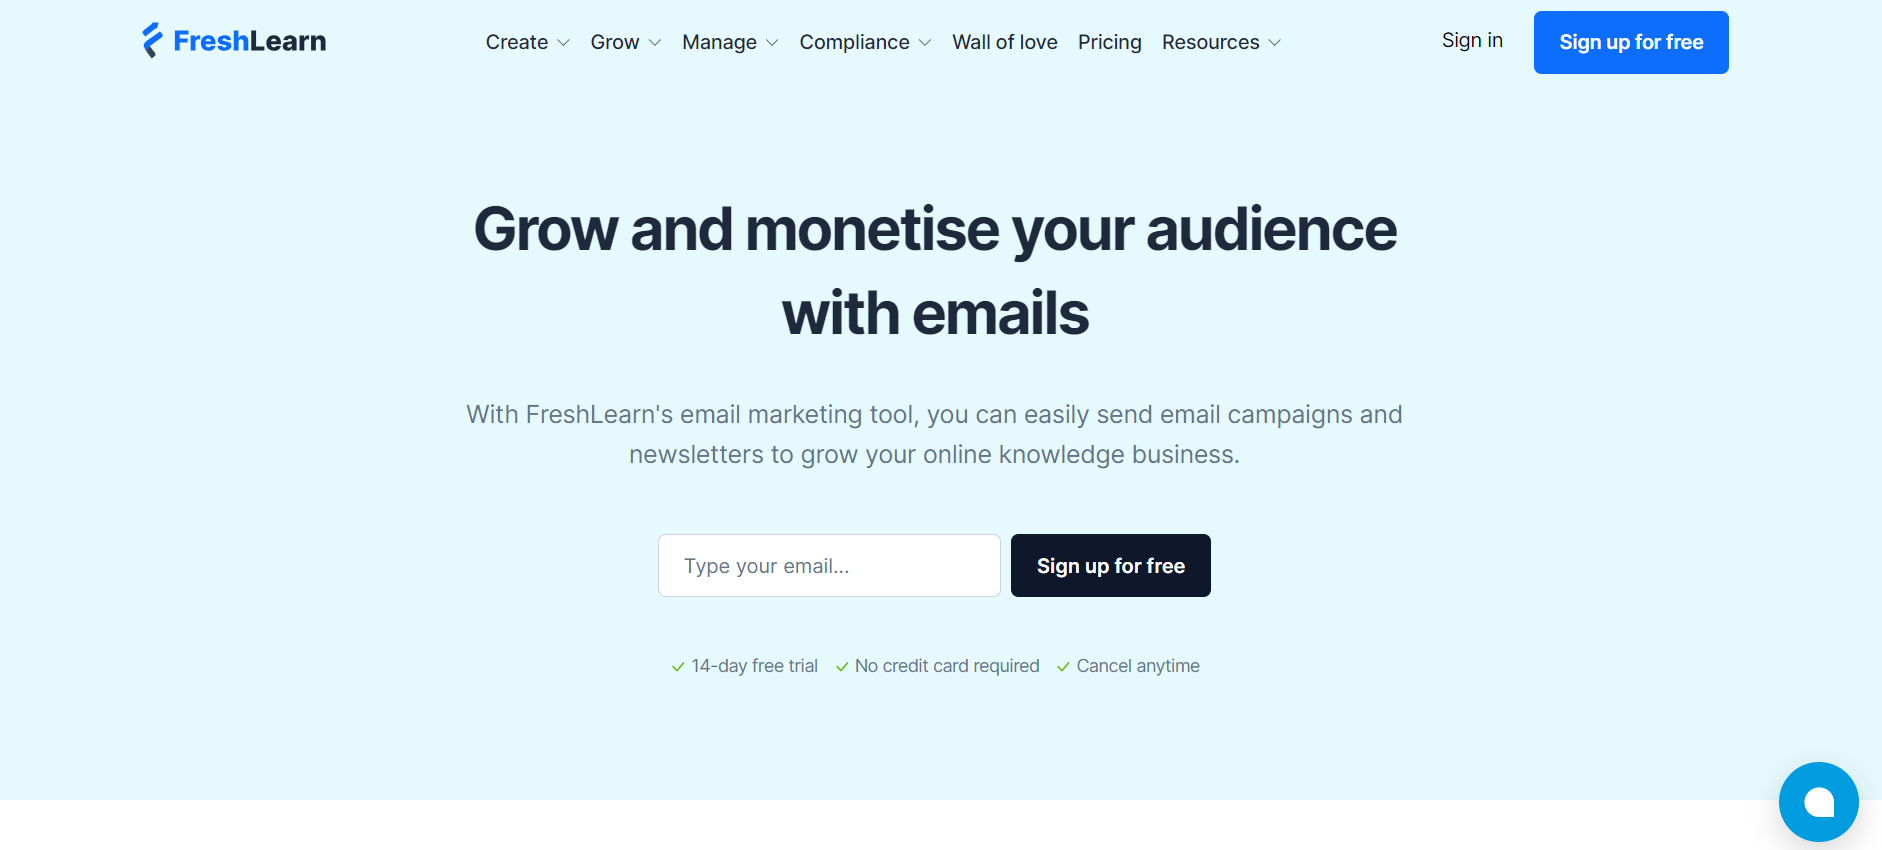 Monitise Your Audience with Emails